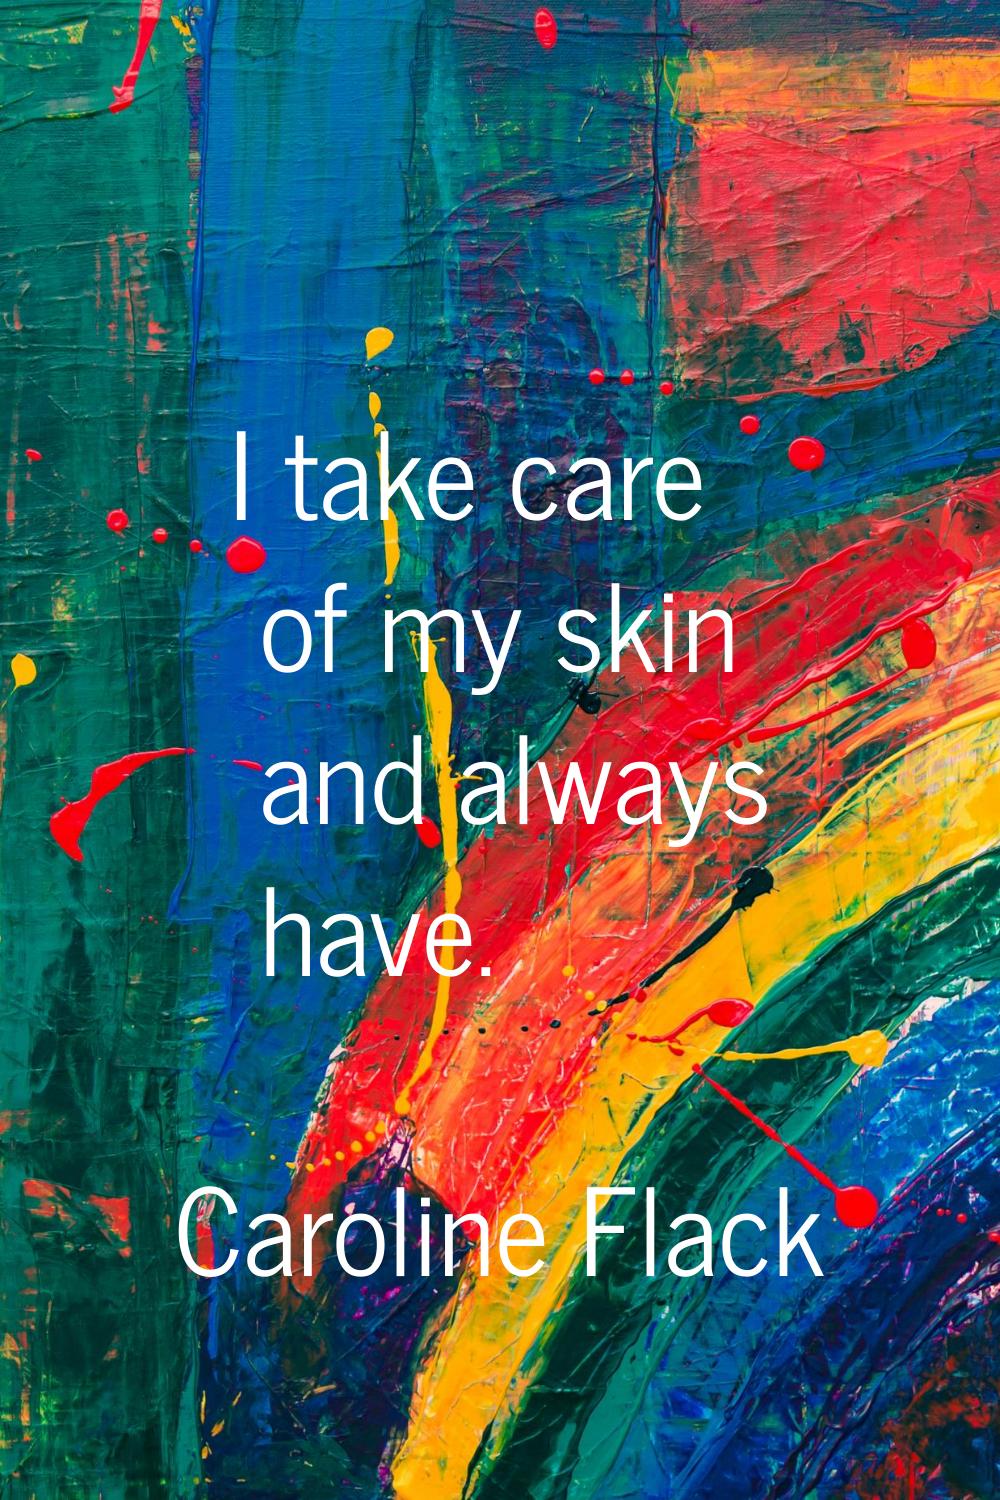 I take care of my skin and always have.